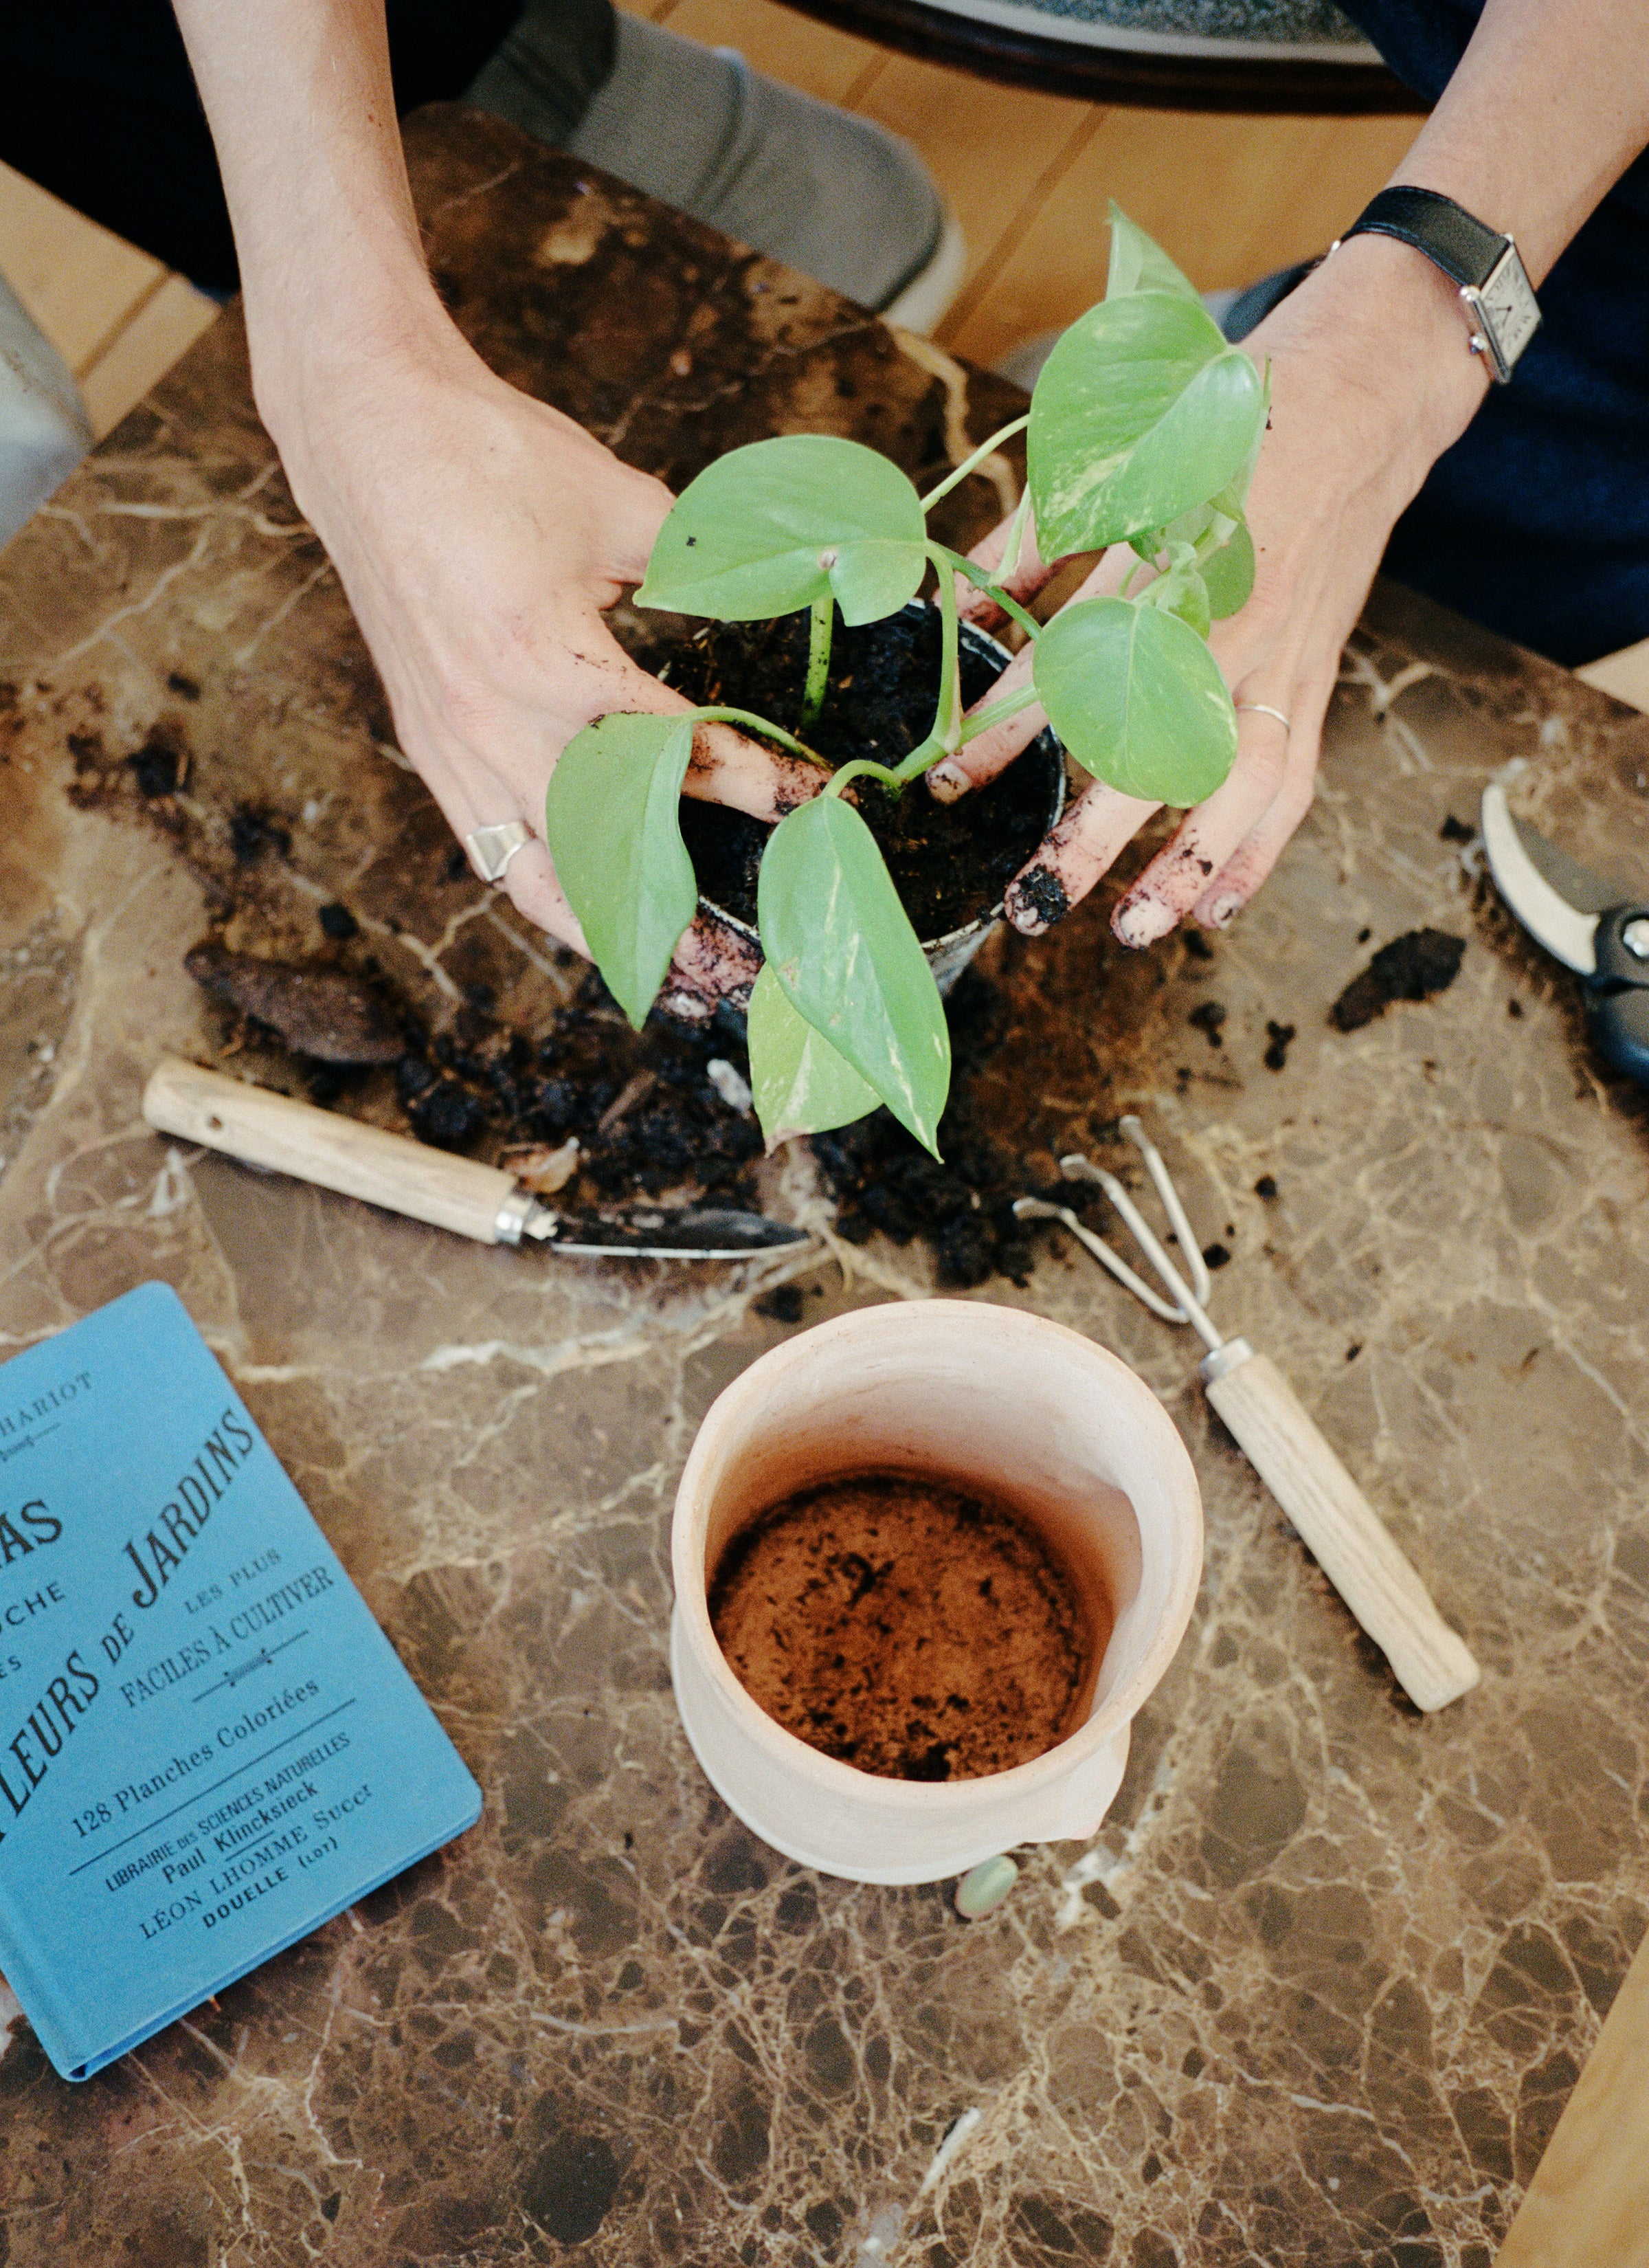 A pair of hands plant a plant into a pot with gardening tools, a mini shovel and a mini rake with a blue book around it on a brown marble table.